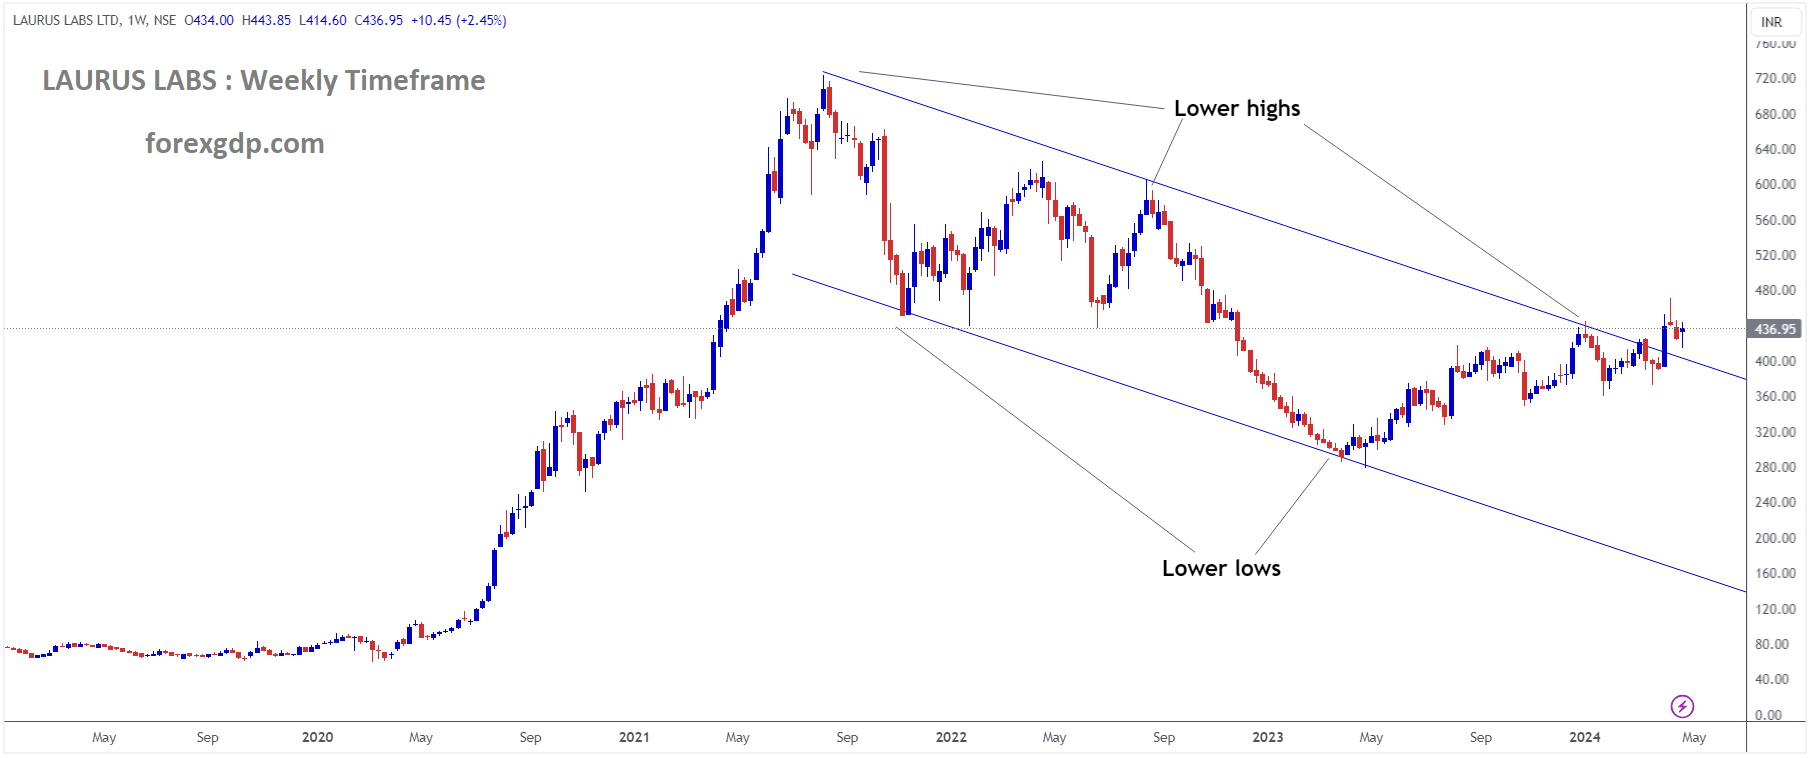 LAURUS LABS Market Price is moving in Descending channel and market has reached lower high area of the channel